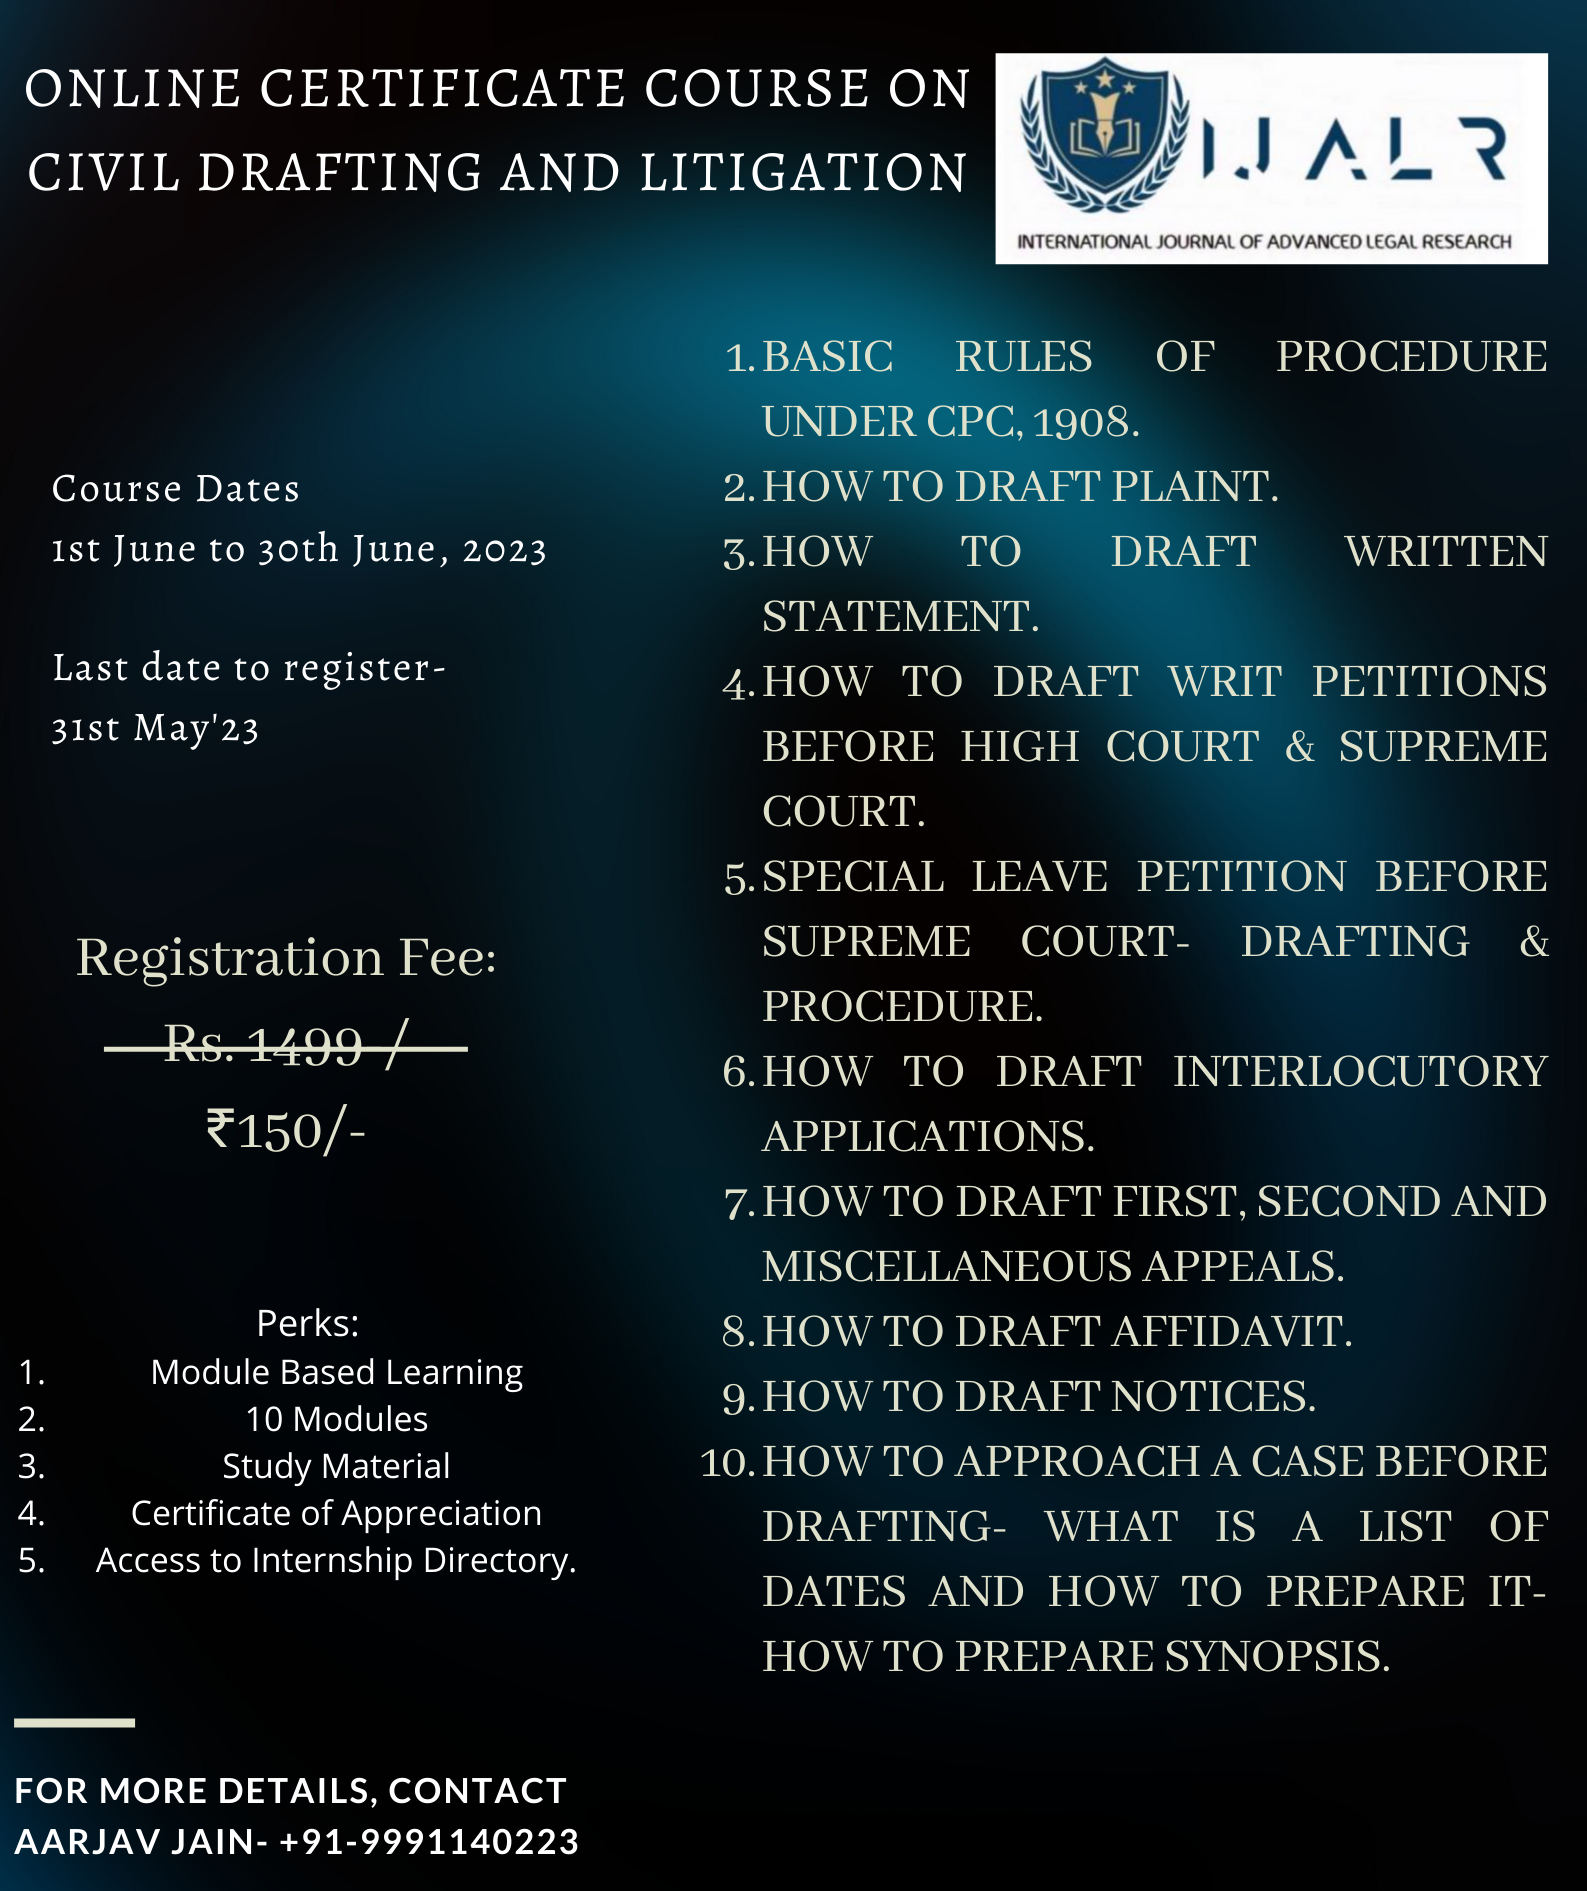 ADVANCED ONLINE CERTIFICATE COURSE & CRASH COURSE ON CIVIL DRAFTING AND LITIGATION: IJALR